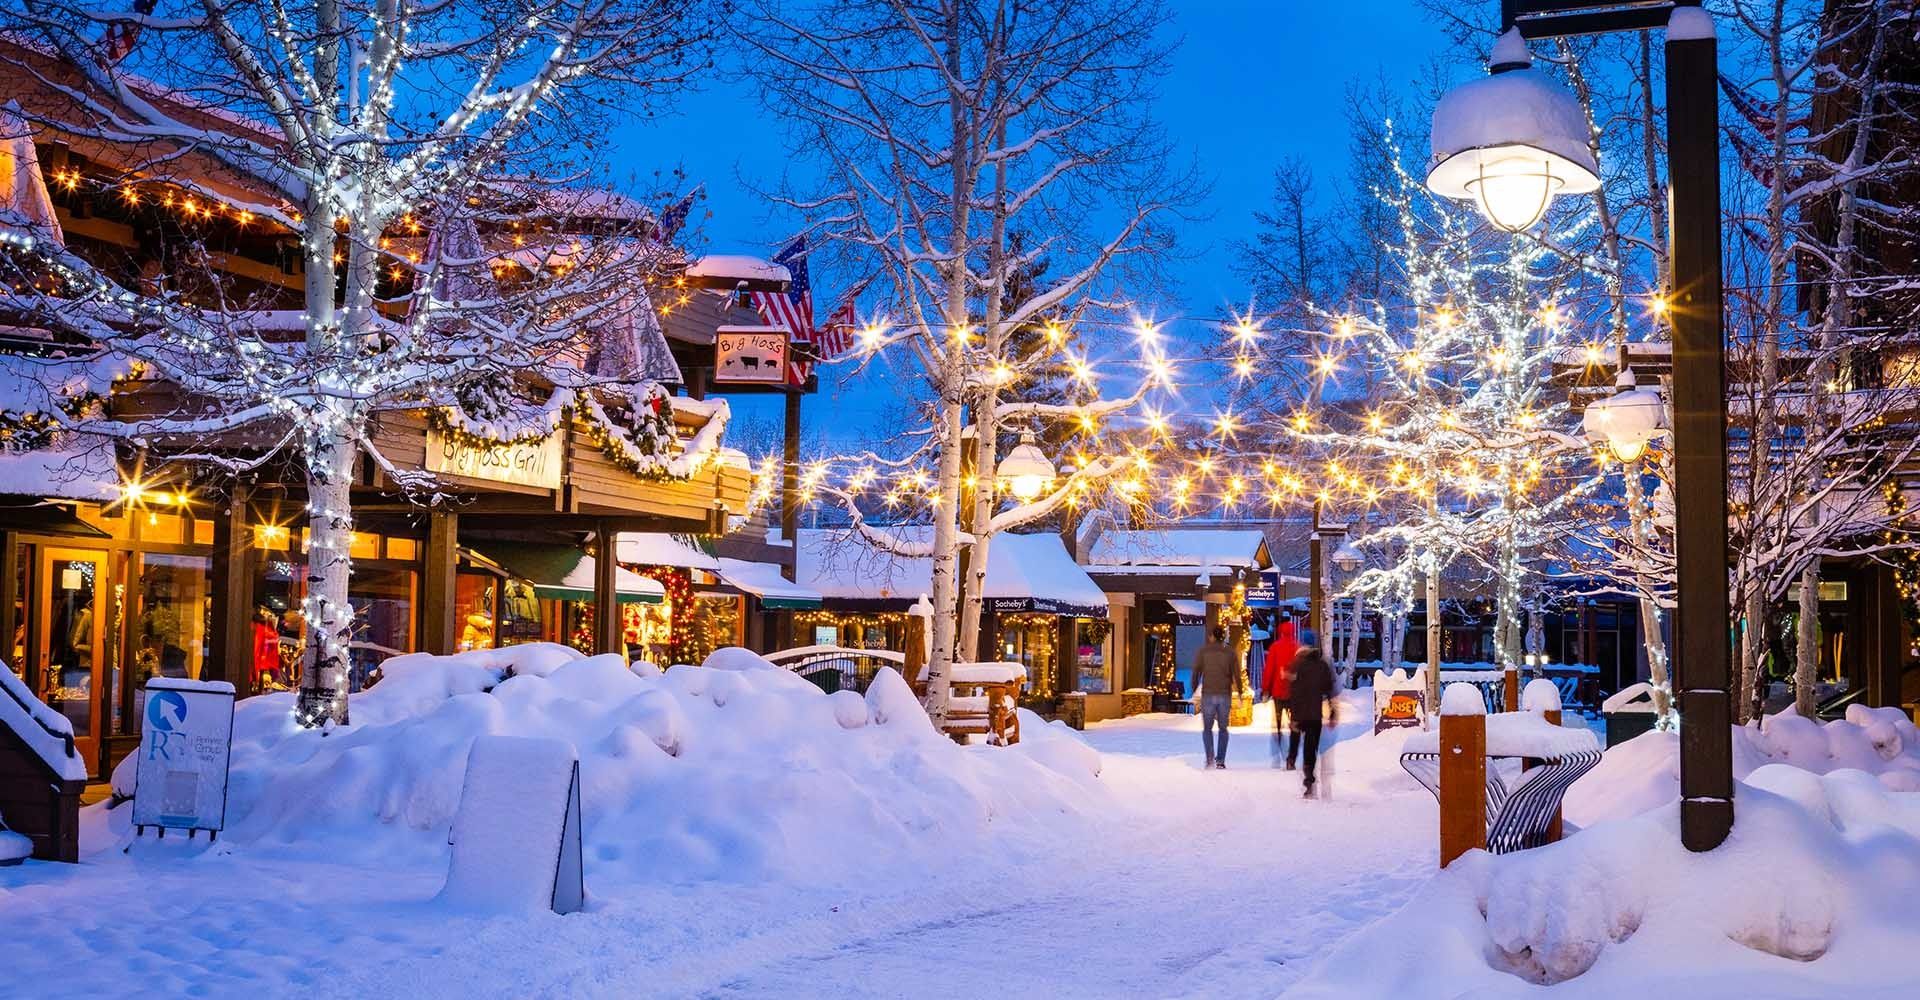 26 Best Christmas Towns 2023 - Top Christmas Towns in the USA